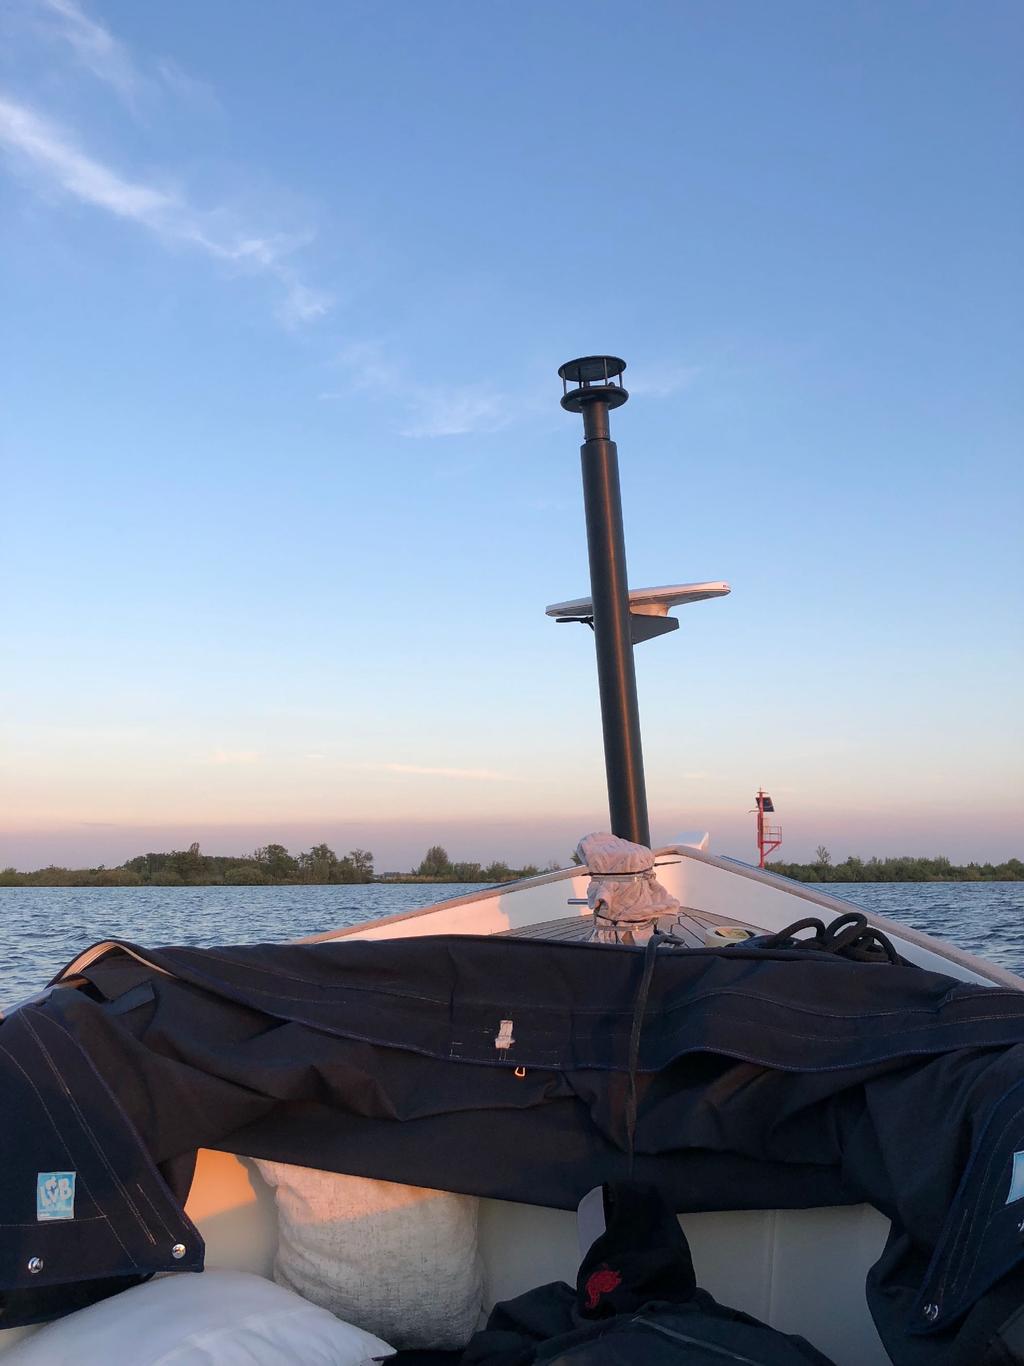 Highly accurate sensor The SAILMON Coach Pole is a highly accurate GPS heading sensor, equipped with a sonic wind sensor to monitor and log calibrated wind speed and direction directly to the SAILMON